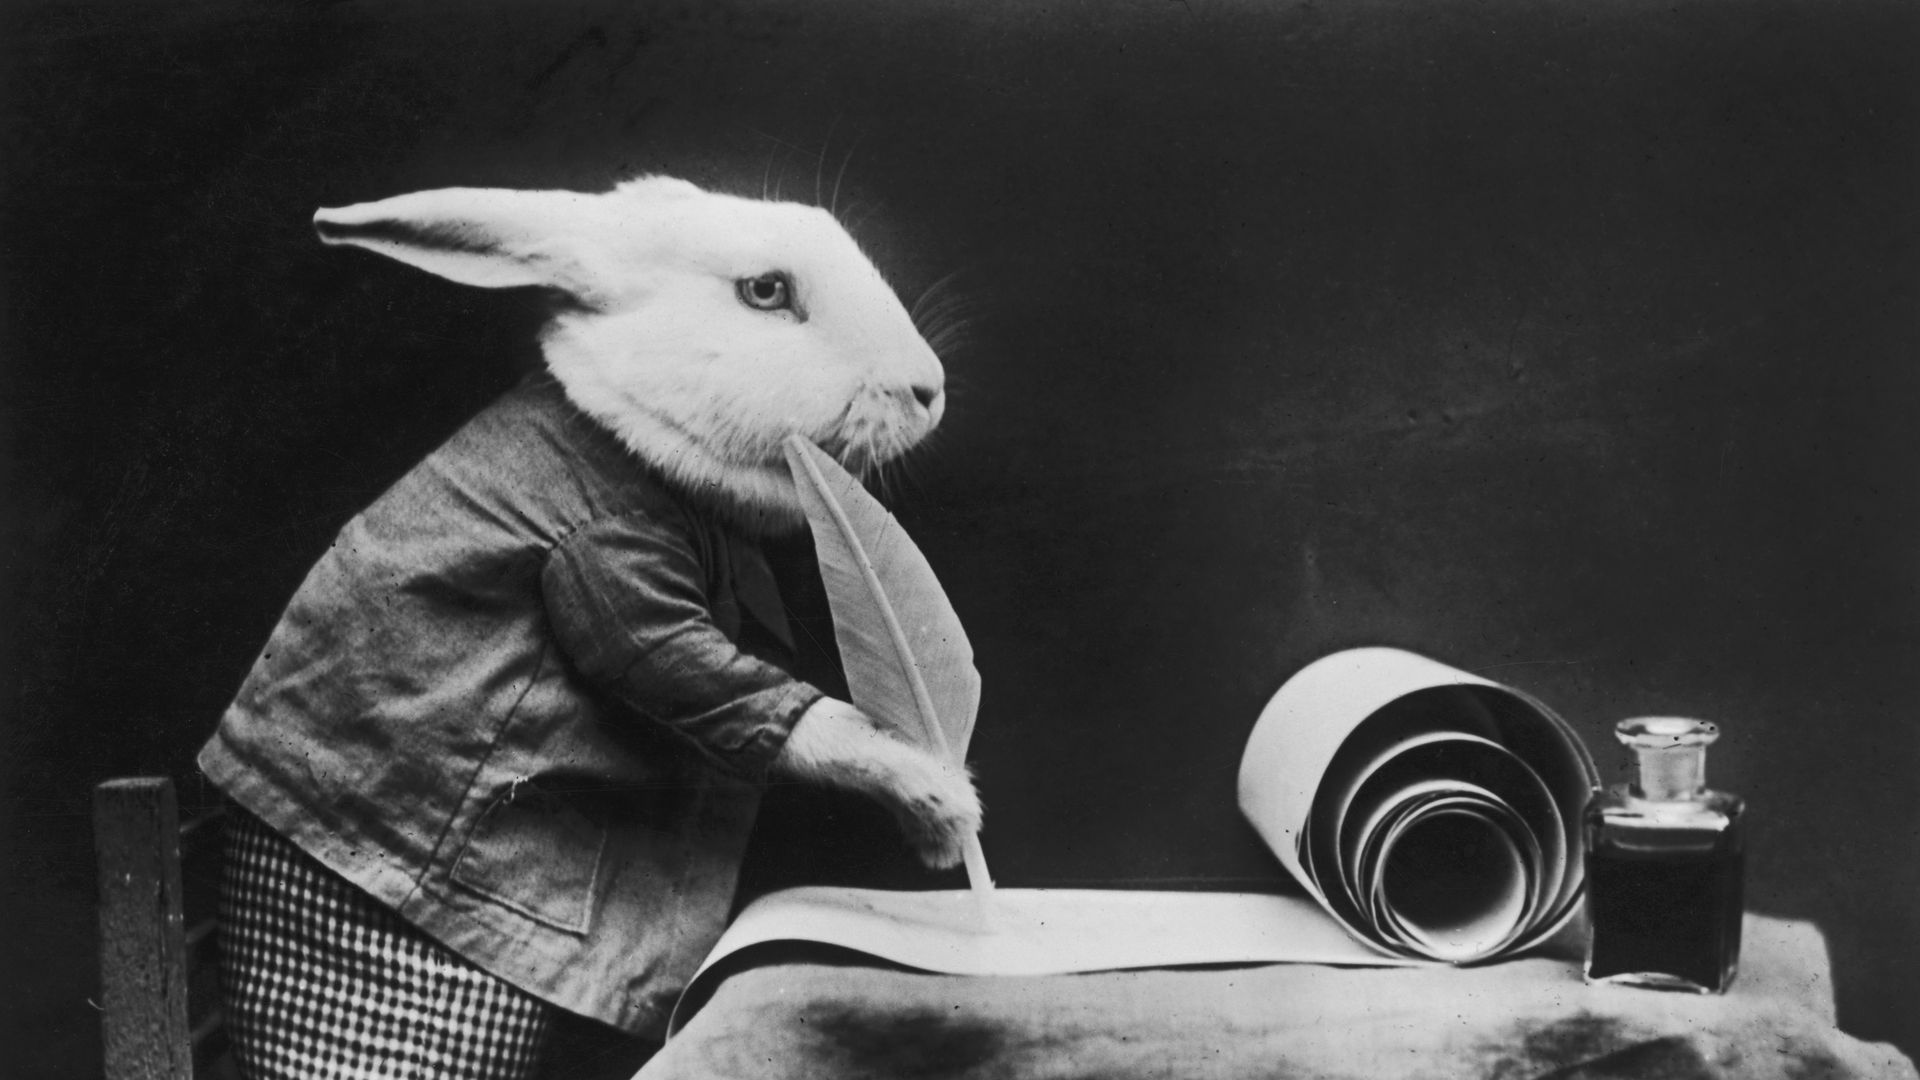 Photo of white rabbit wearing clothing and writing with feather pen on scroll.